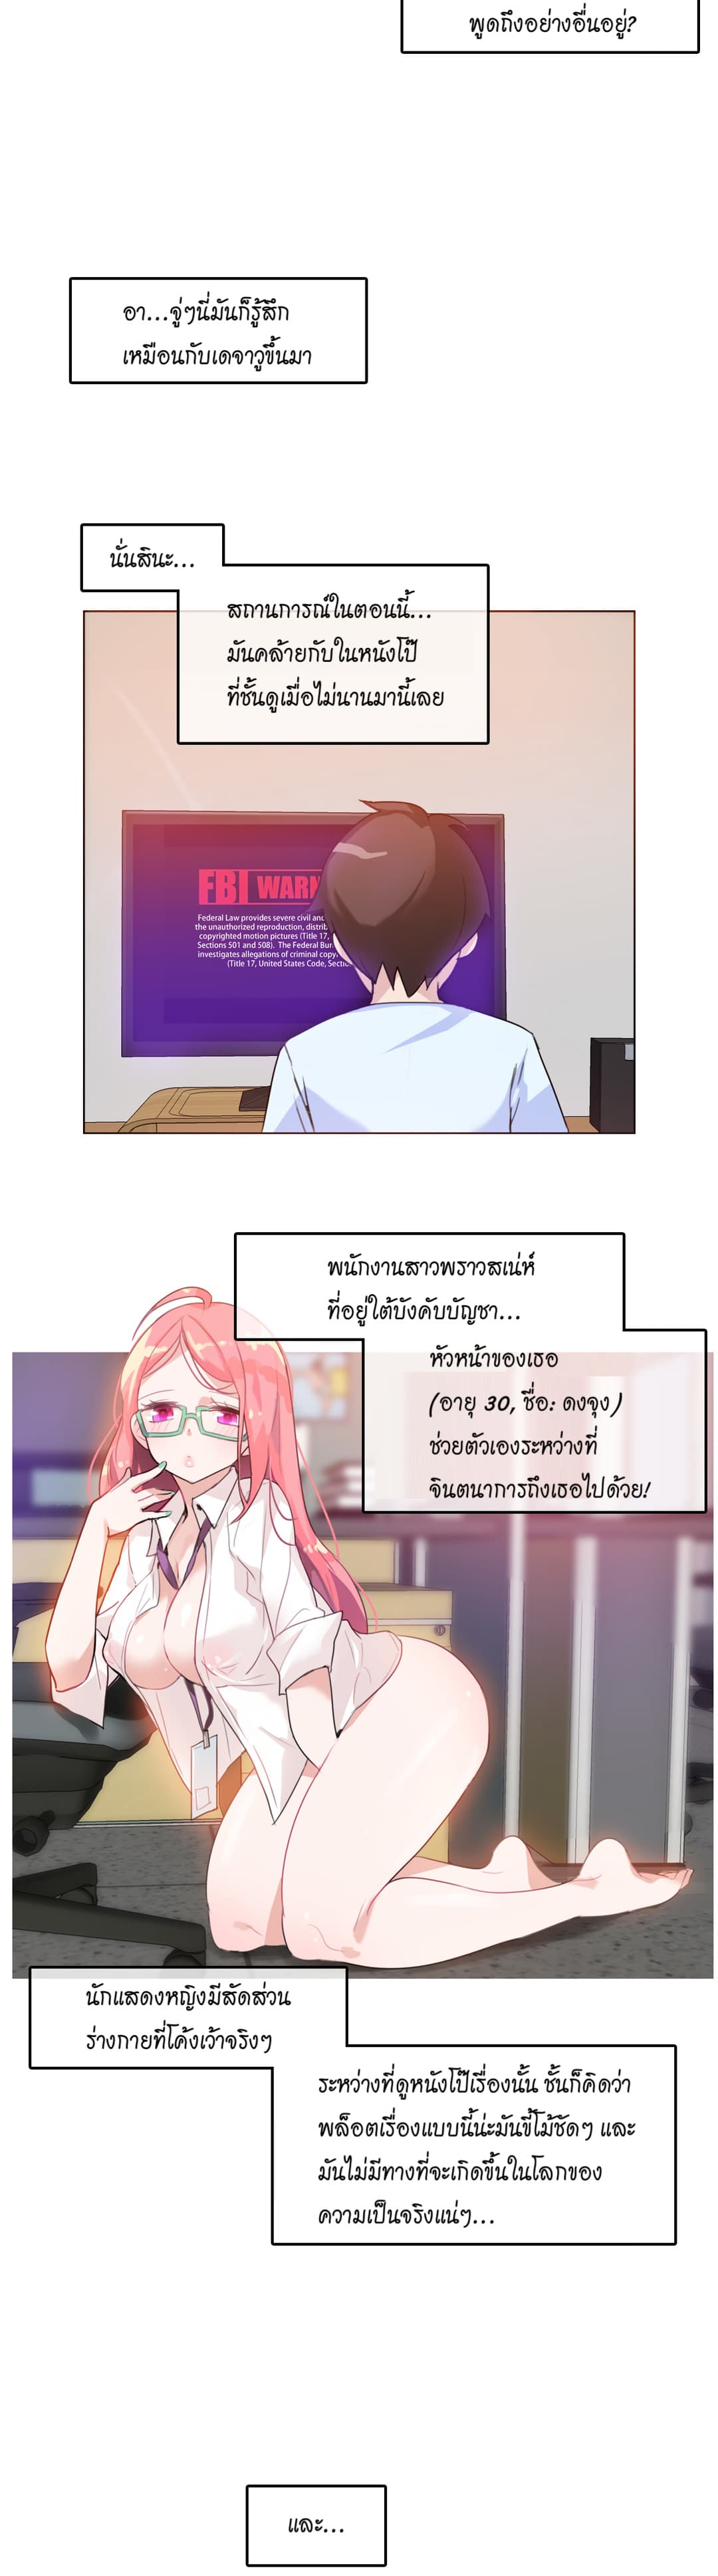 A Pervert’s Daily Life 10 (8)